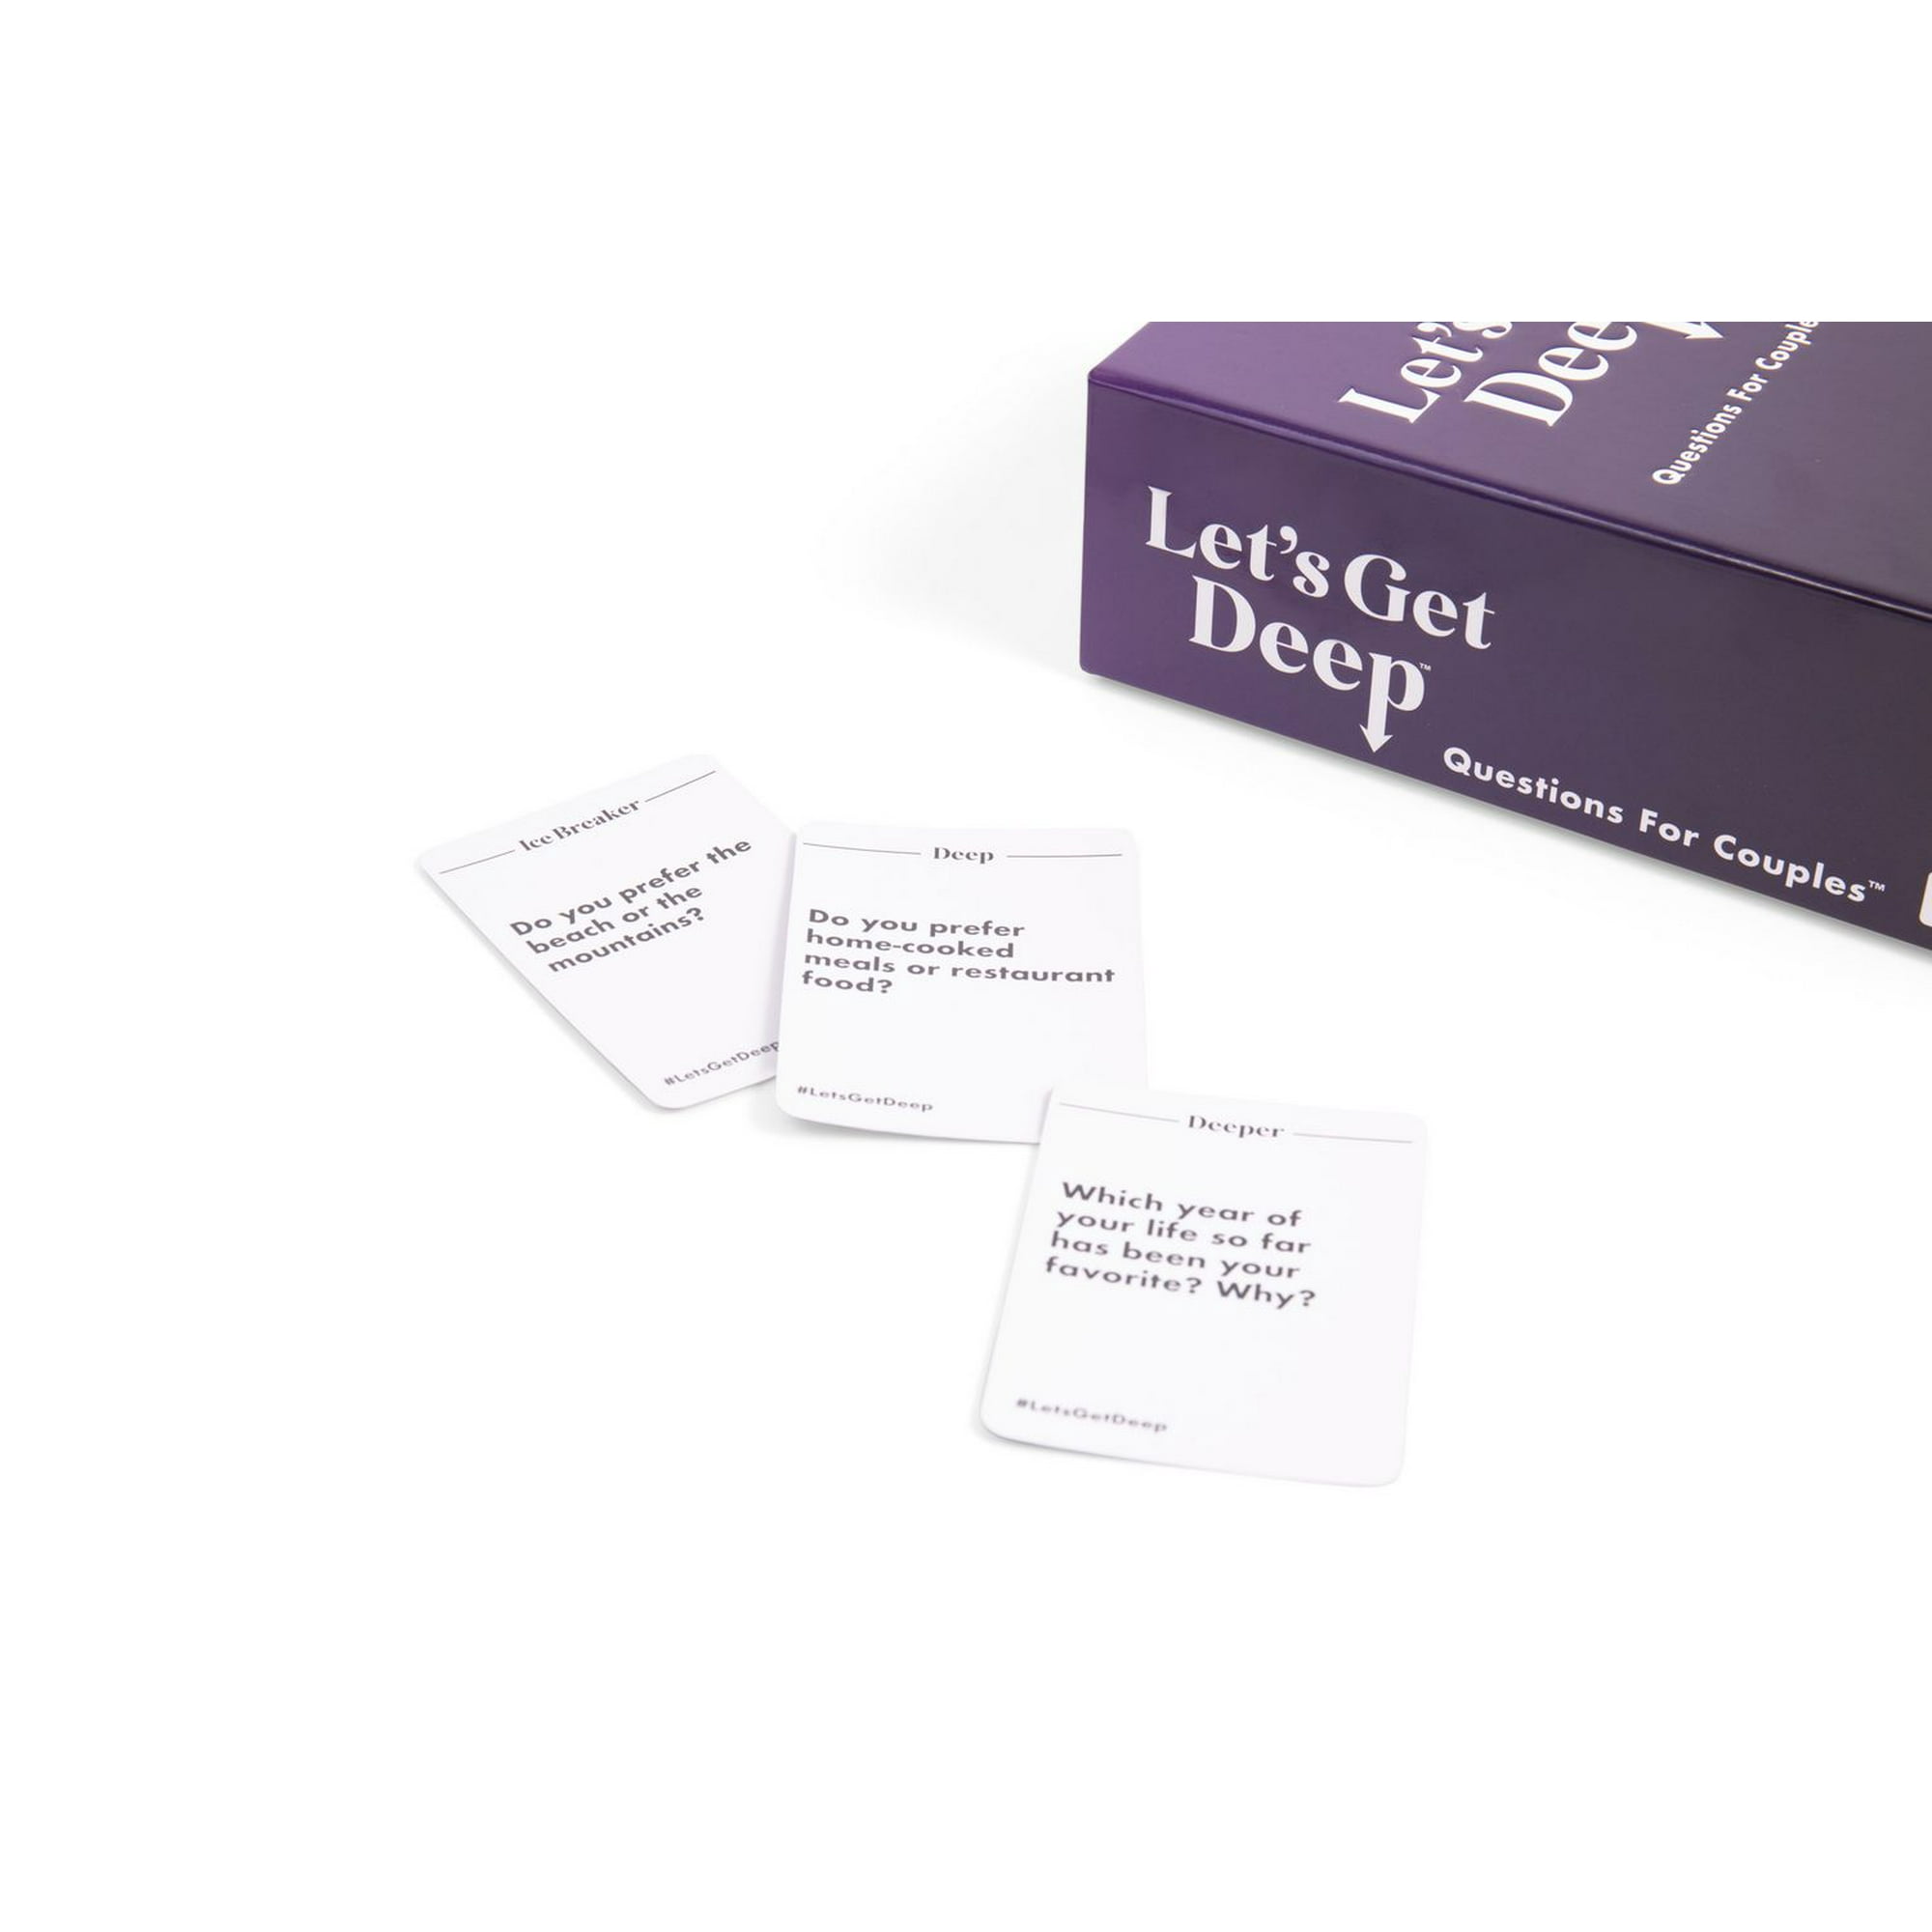 WHAT DO YOU MEME? Let's Get Deep - Conversation Cards for Couples, Love  Language Card Game